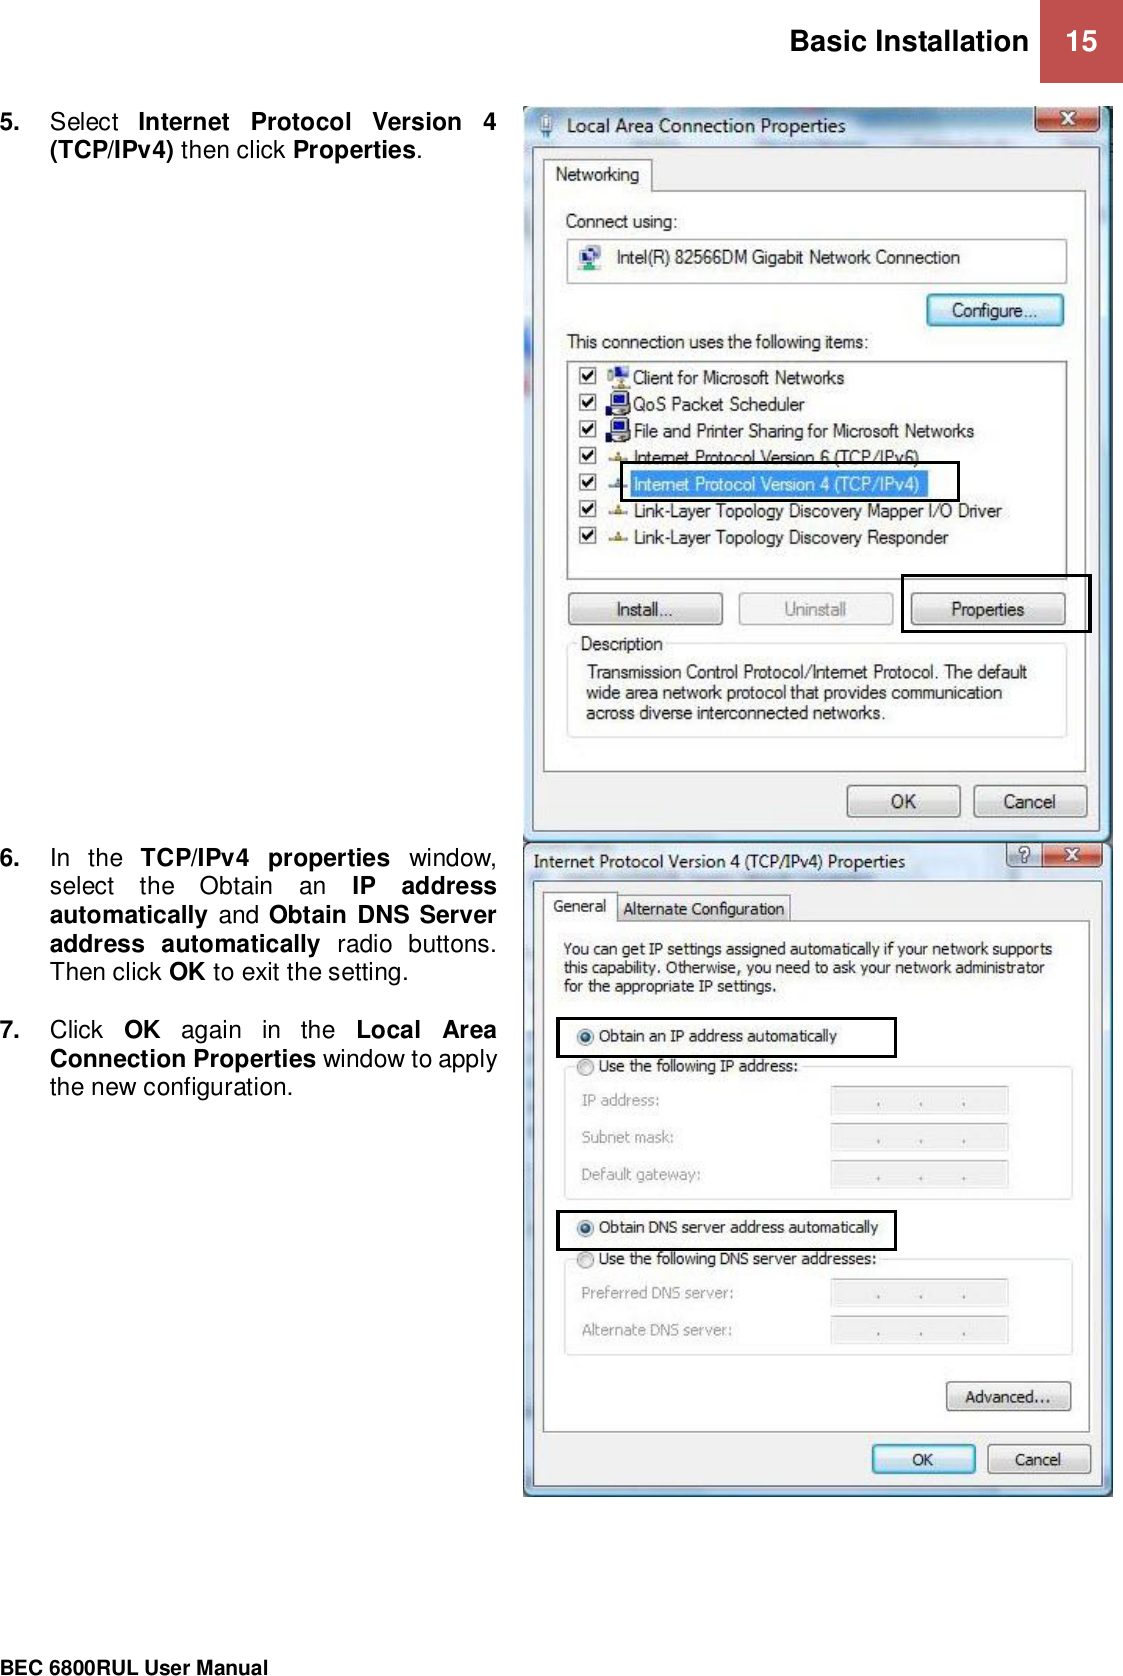 Basic Installation 15                                                 BEC 6800RUL User Manual  5. Select  Internet  Protocol  Version  4 (TCP/IPv4) then click Properties.  6. In  the  TCP/IPv4  properties  window, select  the  Obtain  an  IP  address automatically and Obtain DNS Server address  automatically  radio  buttons. Then click OK to exit the setting.  7. Click  OK  again  in  the  Local  Area Connection Properties window to apply the new configuration.    